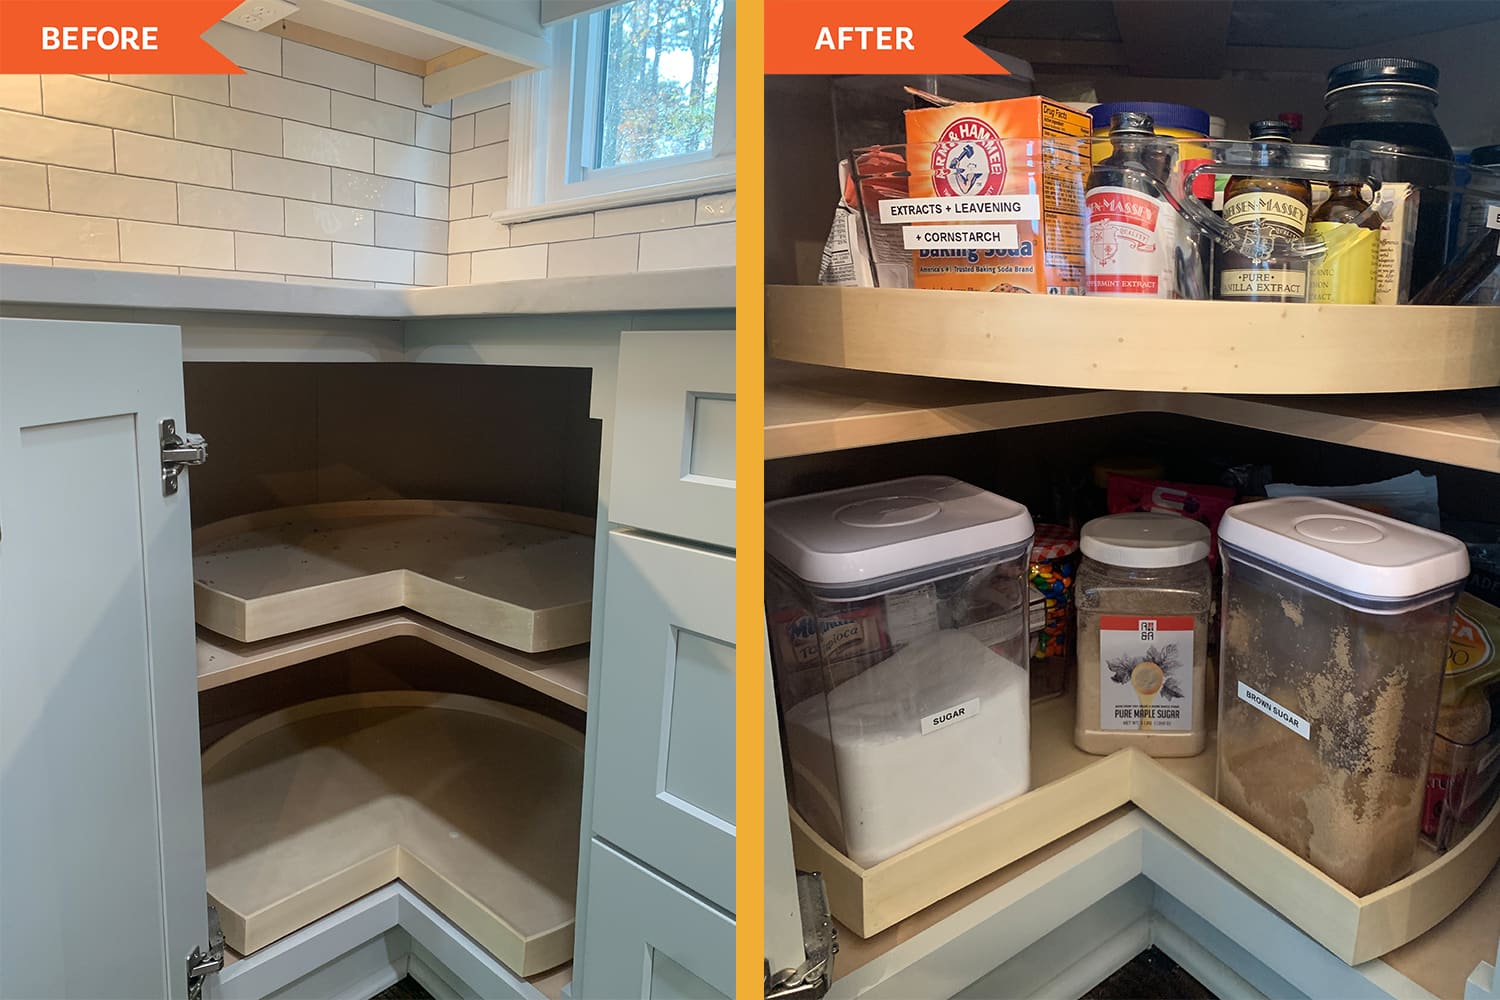 https://cdn.apartmenttherapy.info/image/upload/v1643134032/k/Edit/2022-01-PattyC-Before-And-After-Kitchen-Cabinets/Lazy-Susan-diptych.jpg